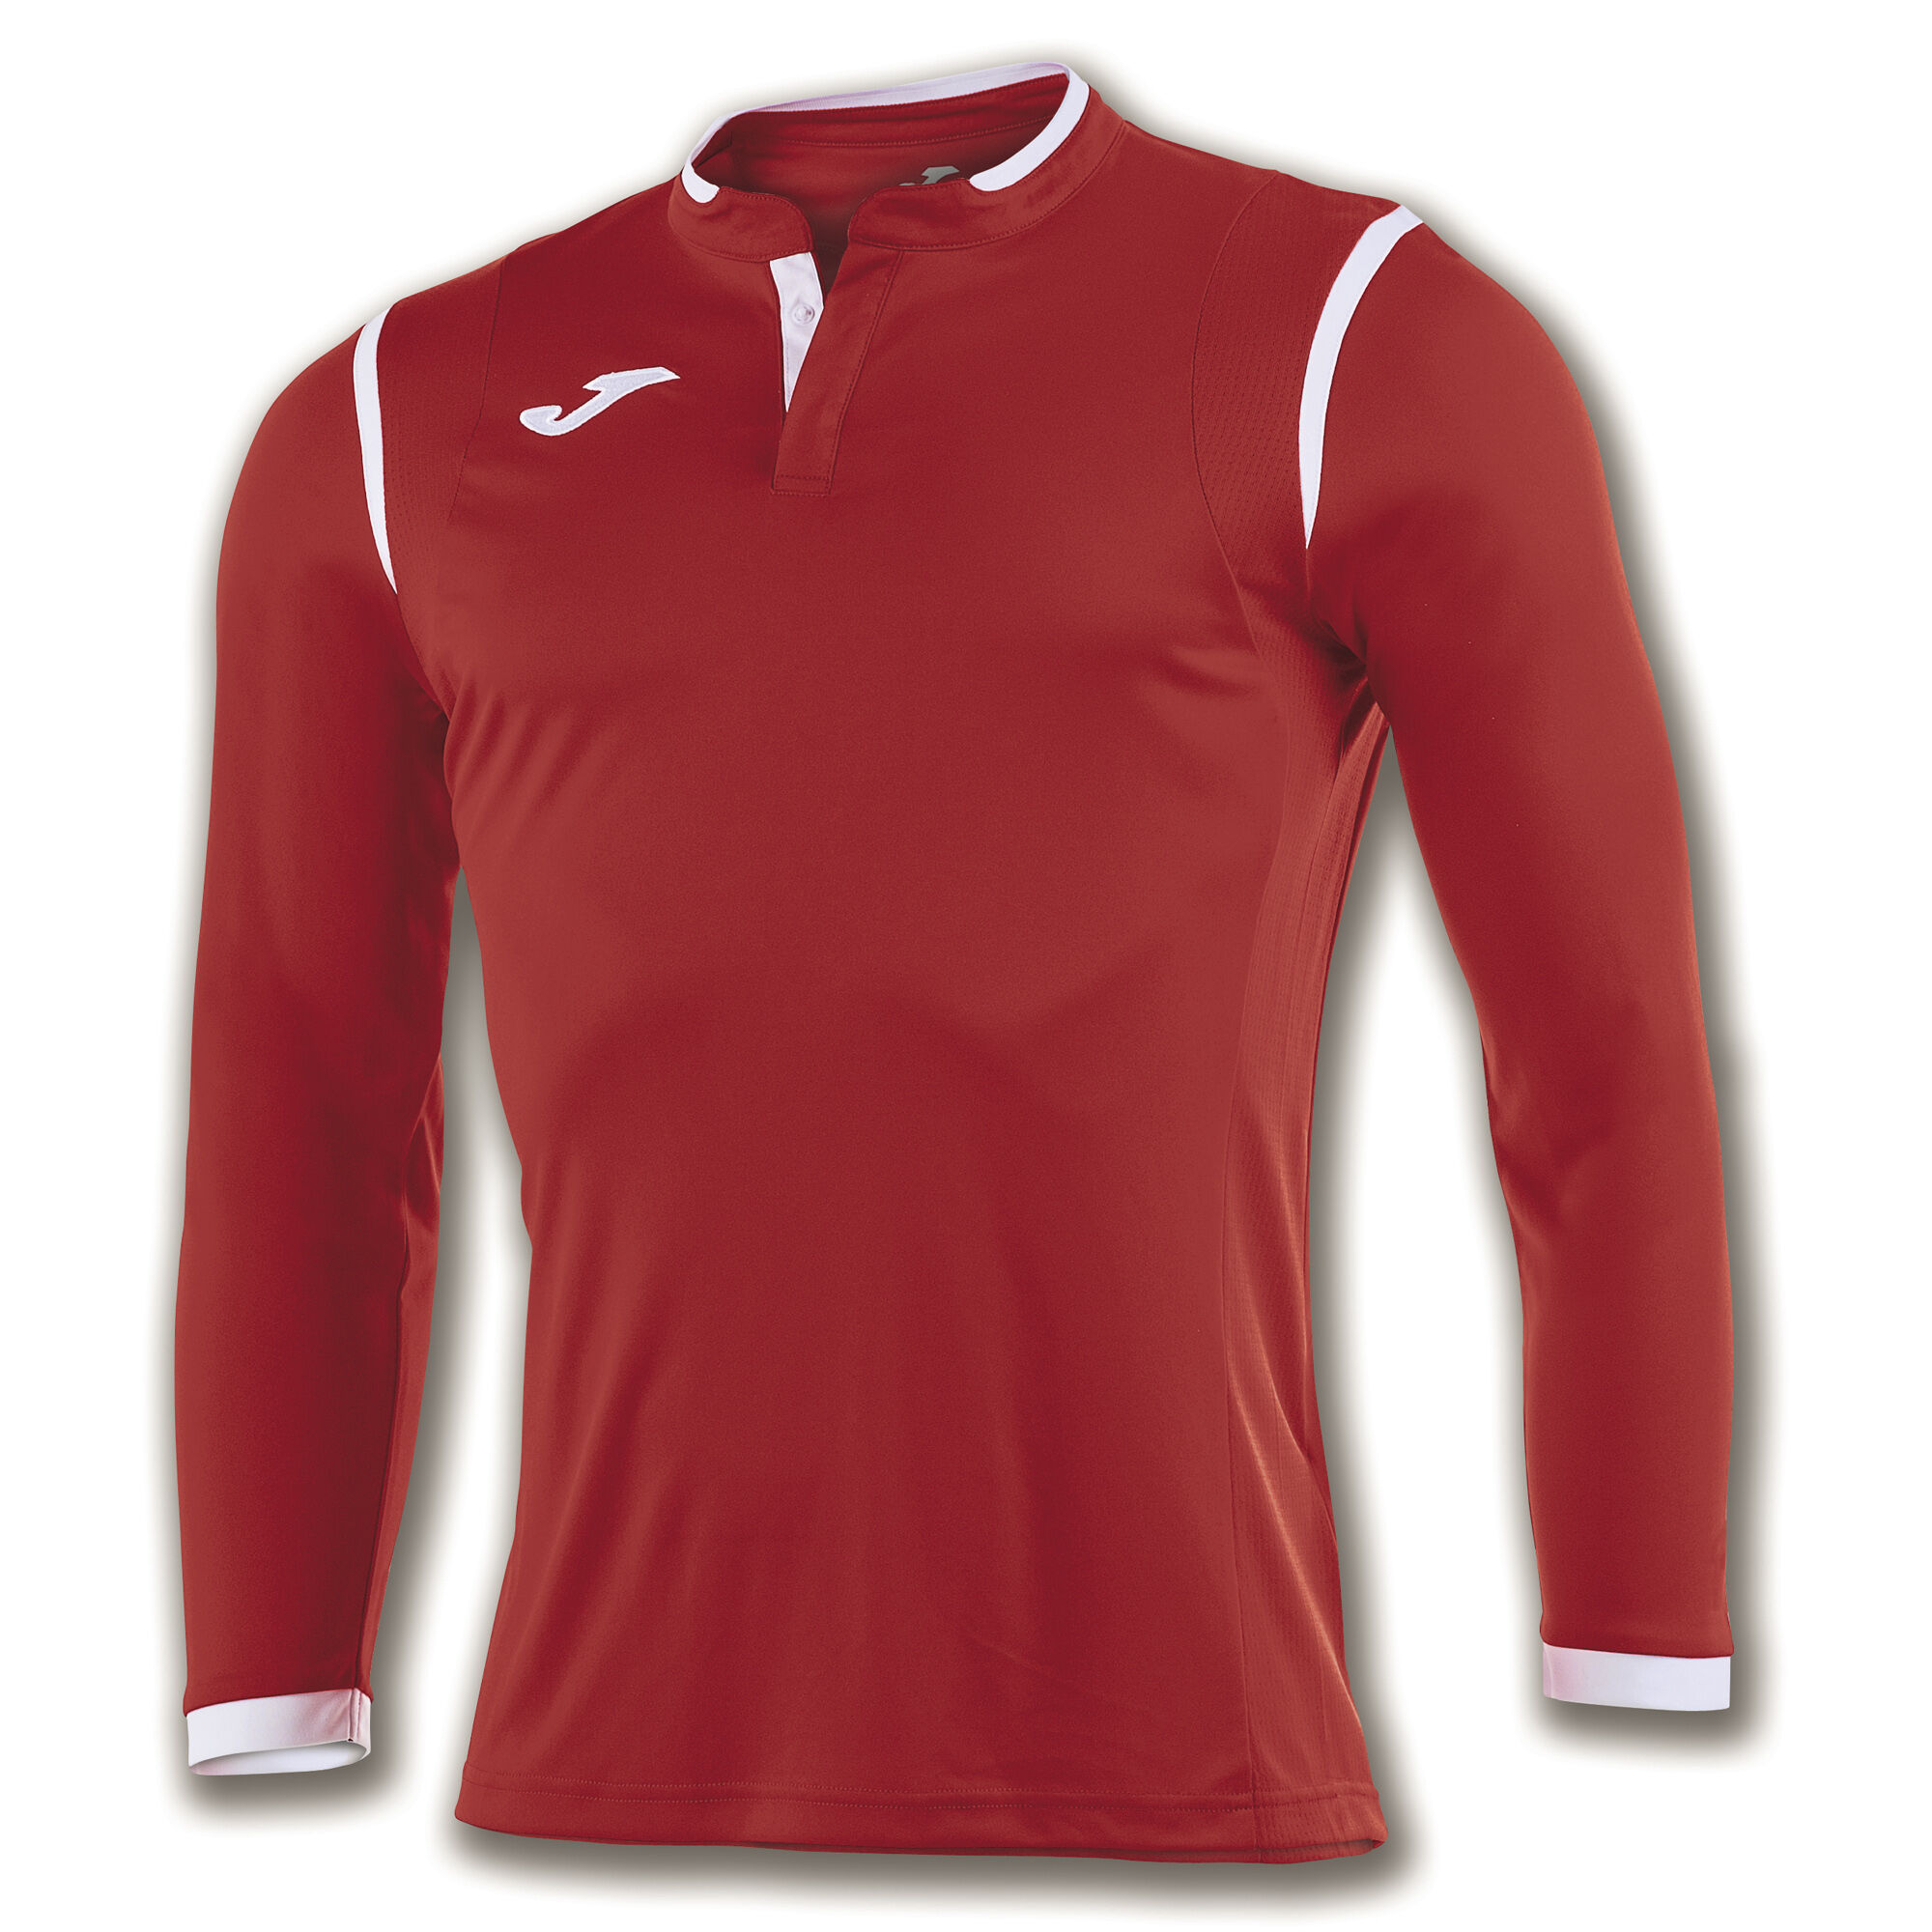 LONG SLEEVE SHIRT MAN TOLETUM RED WHITE